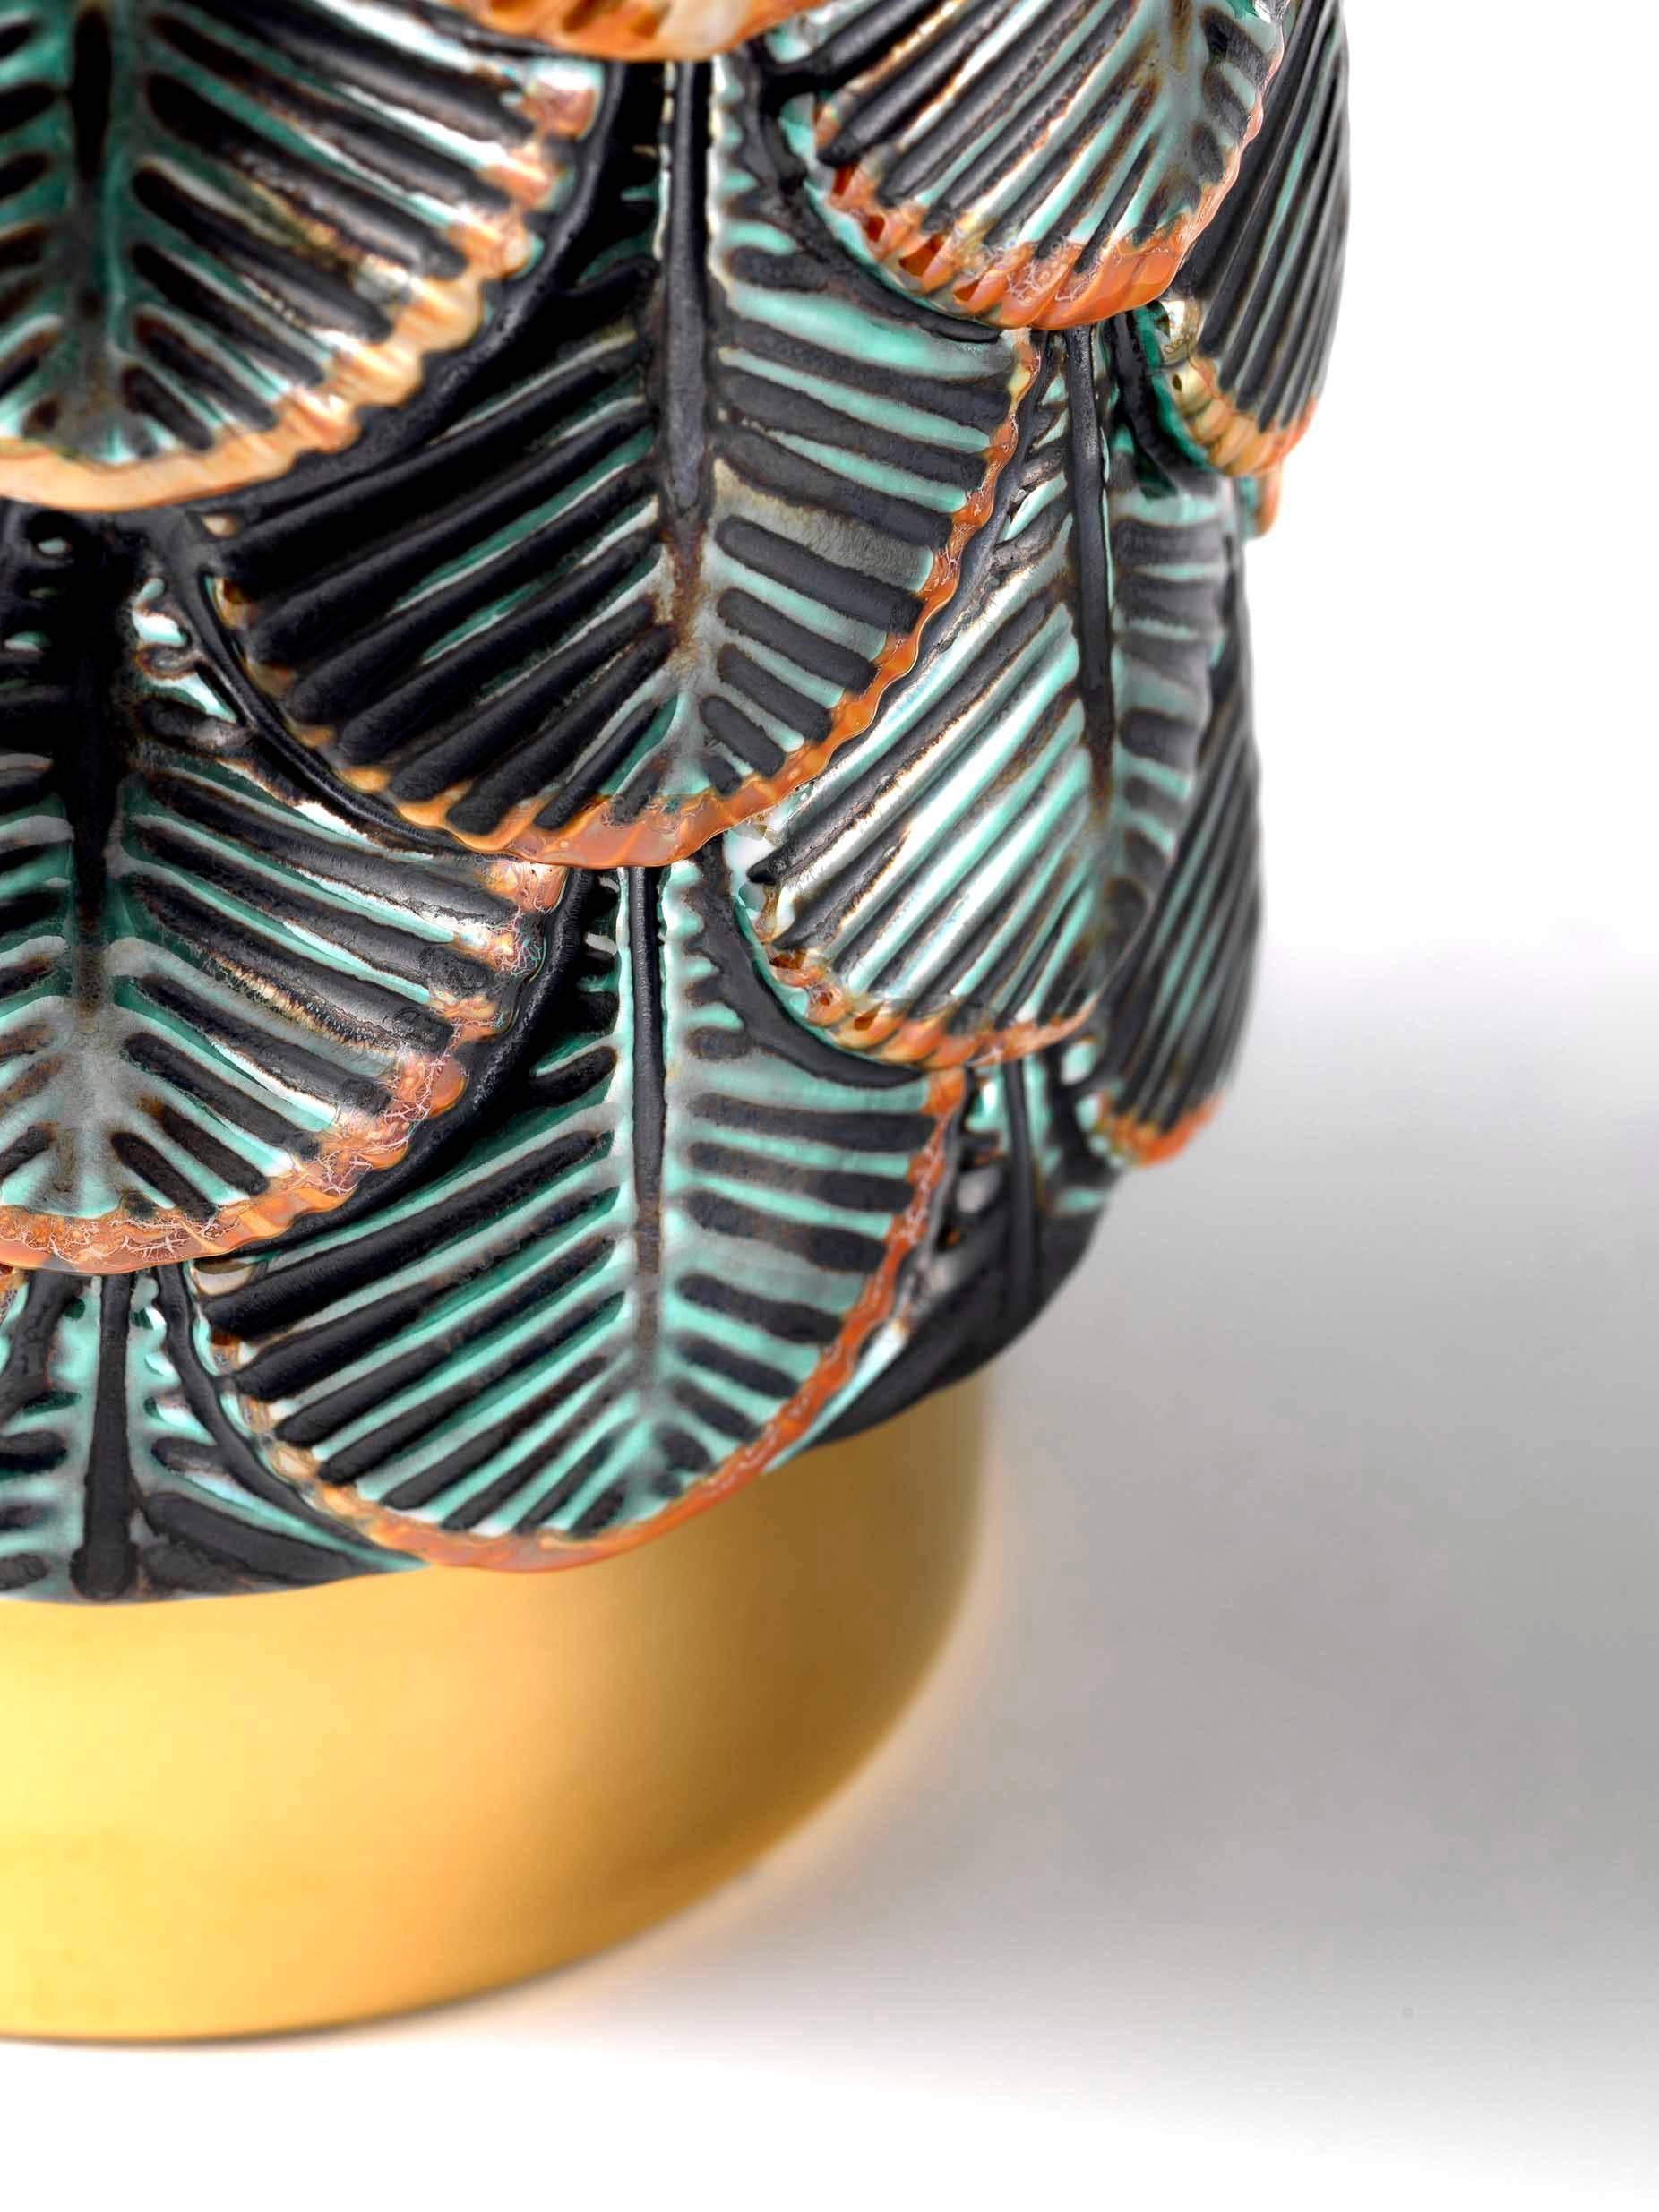 Plumage vase designed by Cristina Celestino for Botteganove is a ceramic vase produced with artisanal methods in Italy and hand-painted with special green and orange metal enamels.
The interior of the piece is white gloss while the plinth is